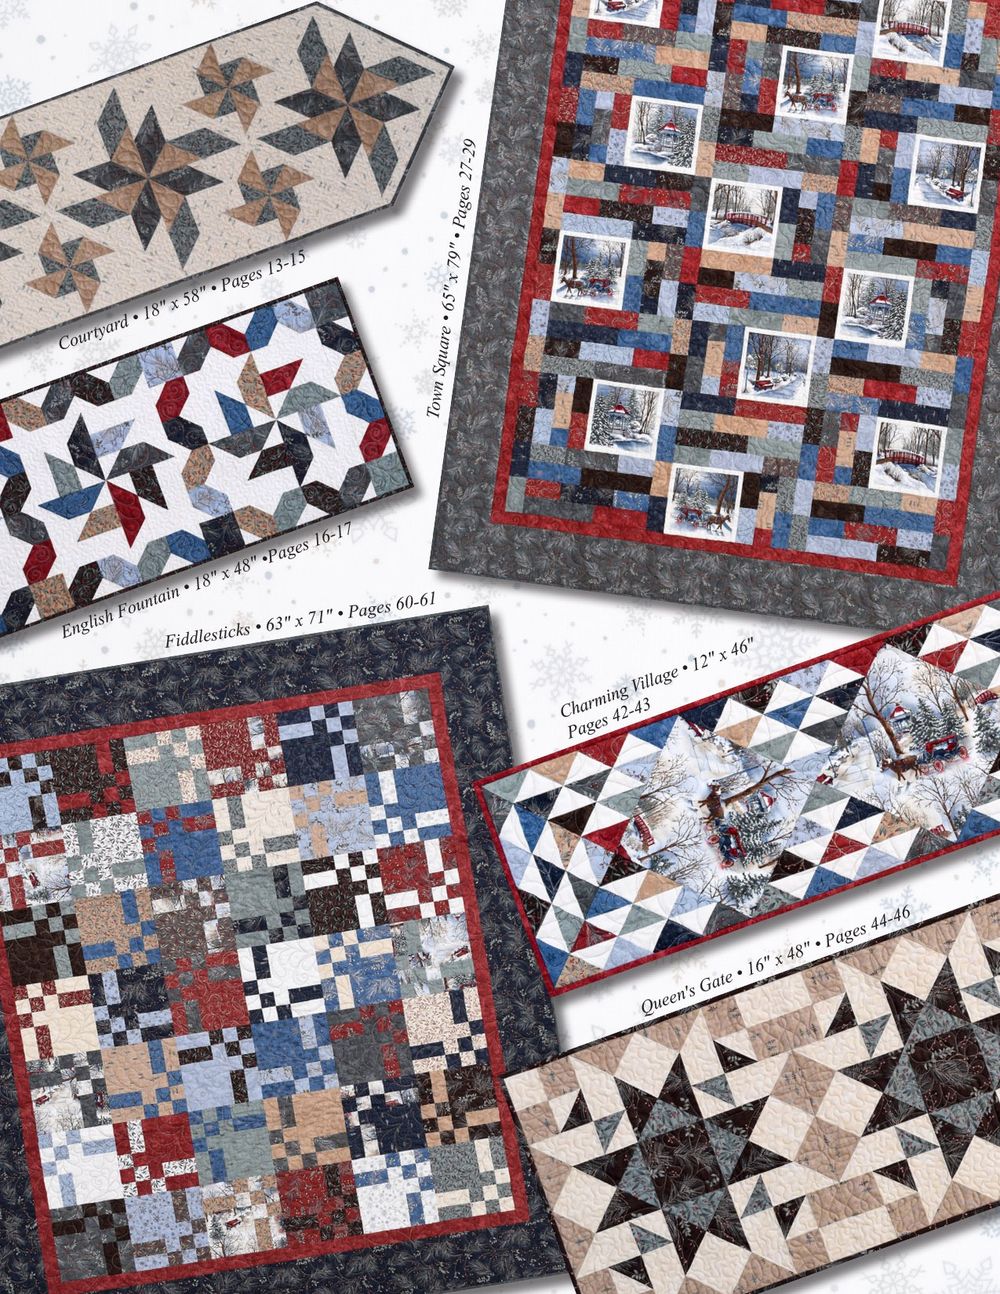 Town Square 20 Christmas Projects Quilt Pattern Book by Doug Leko of Antler Quilt Designs